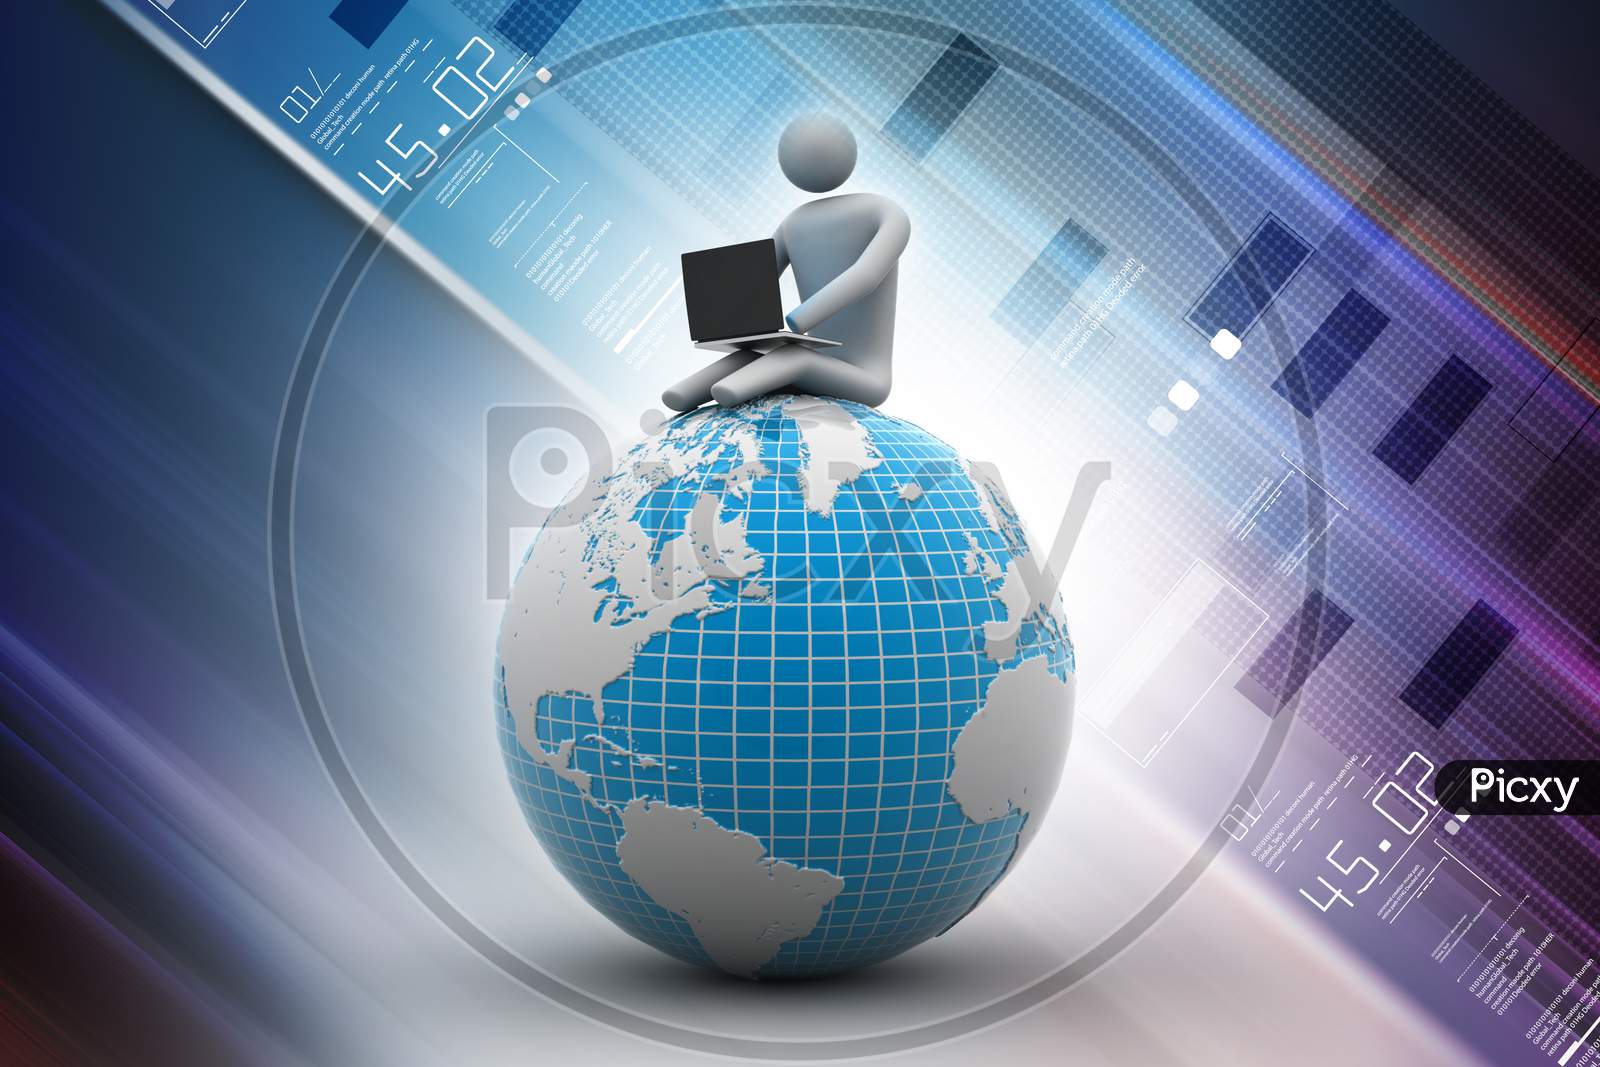 A 3D Man using Laptop by sitting on a Globe